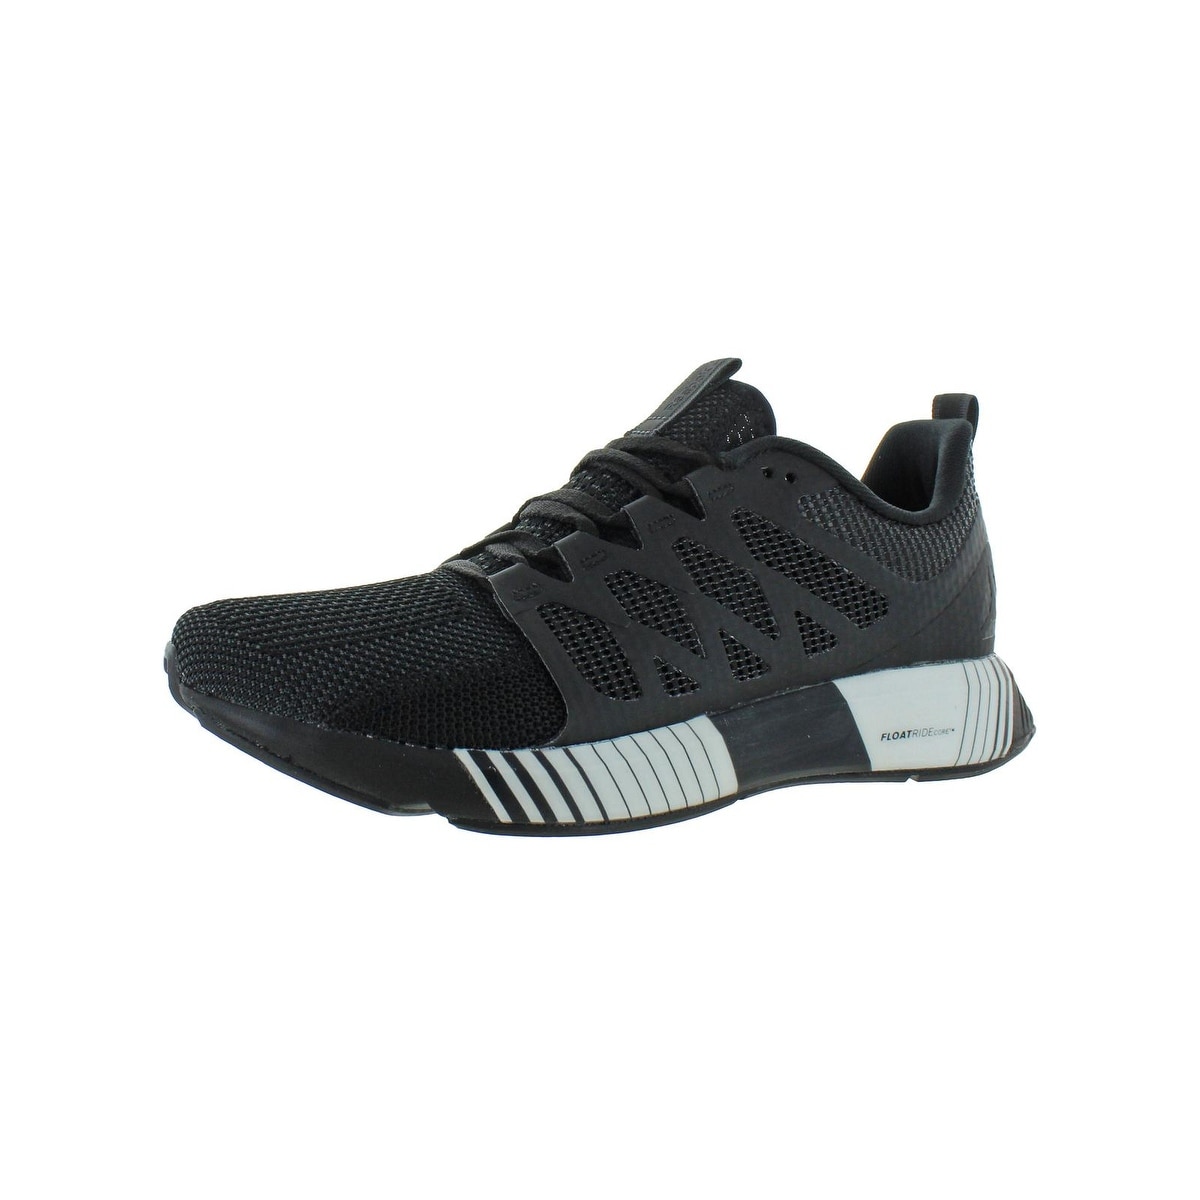 reebok shoes online purchase